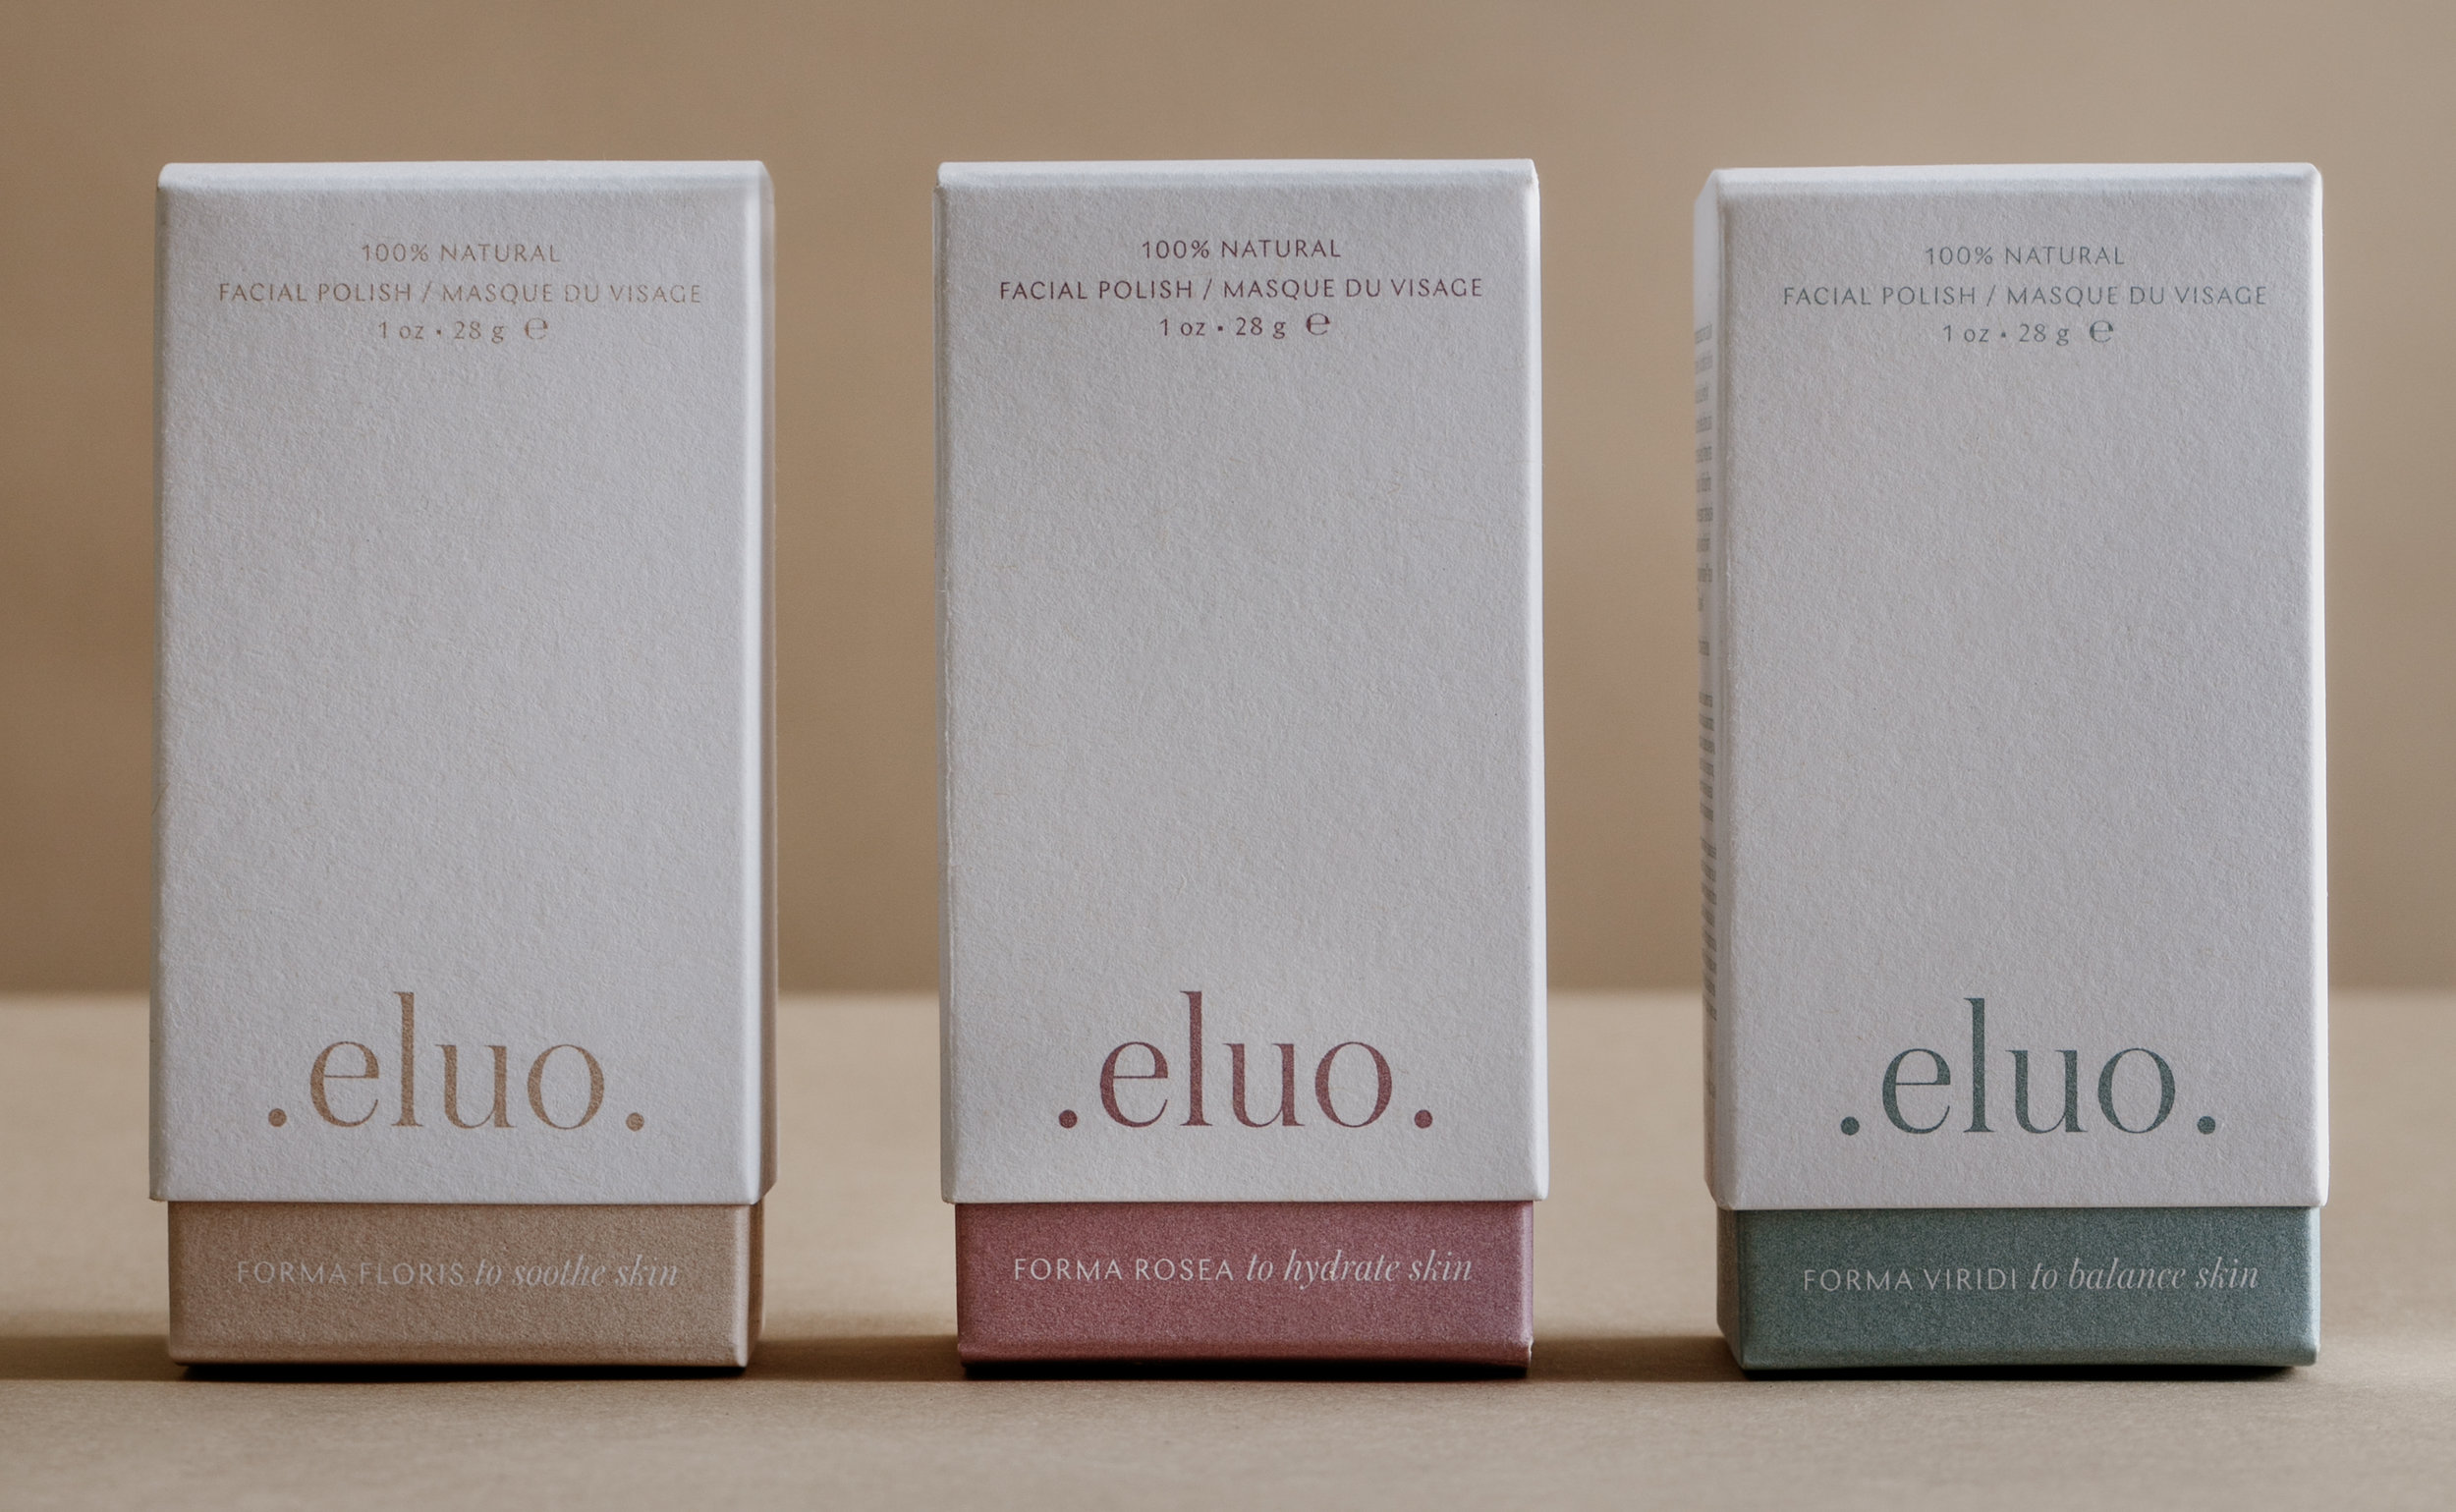 Eluo Skincare Line Packaging Design From Canada